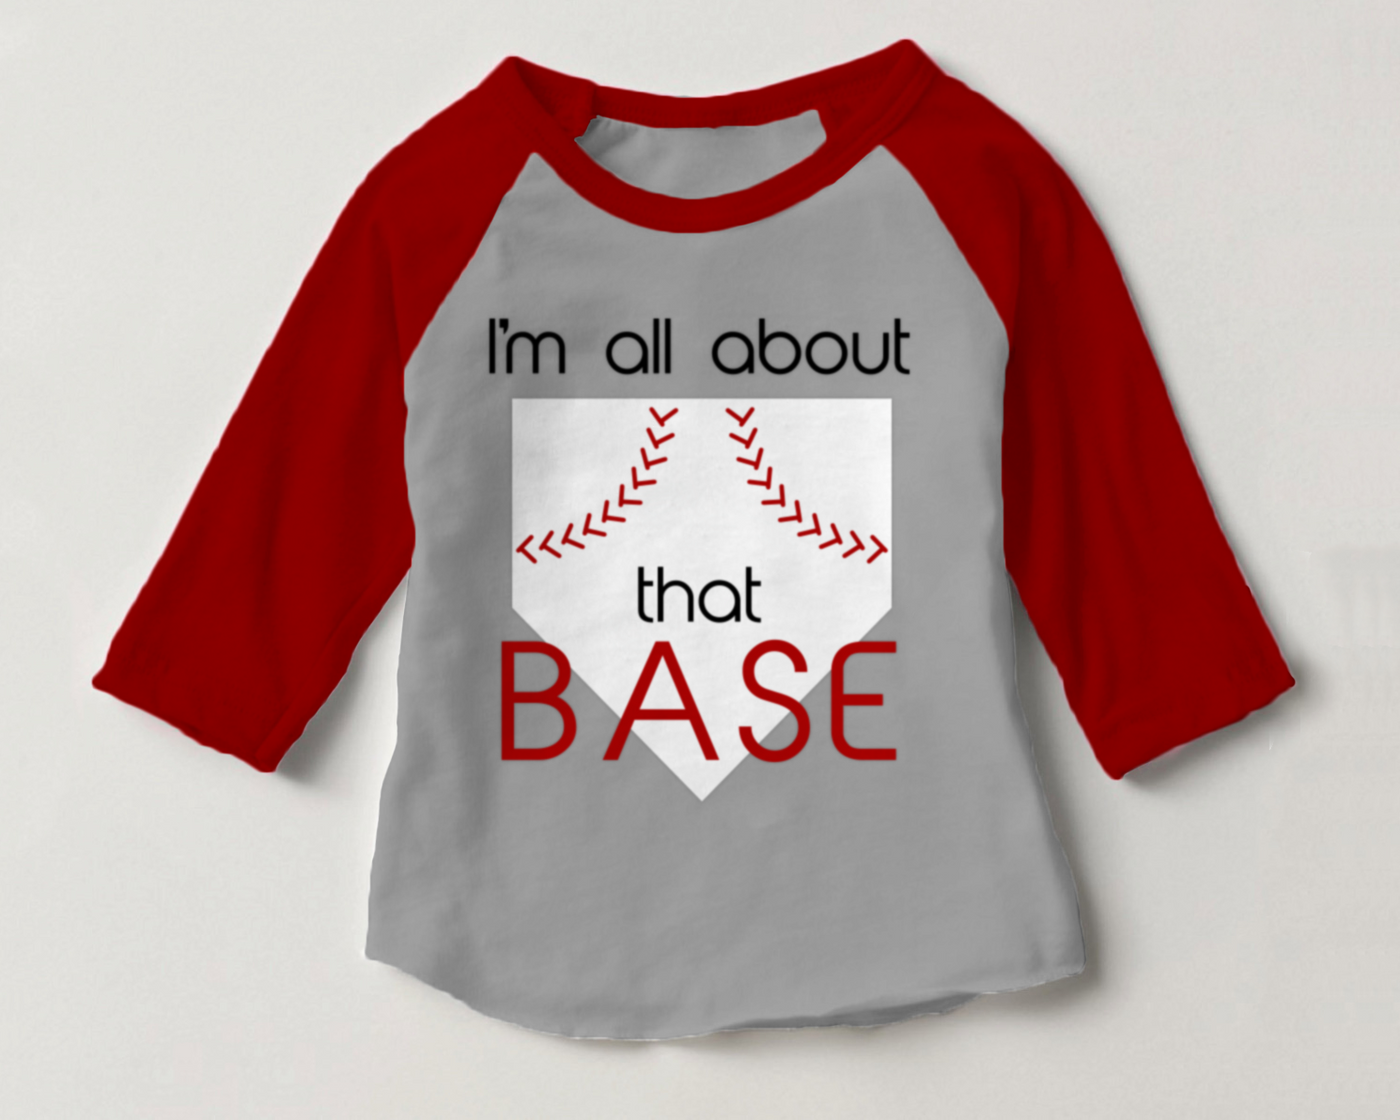 Raglan tee with a design that has a home plate with red stitching like a baseball. Text says "I'm all about that base."